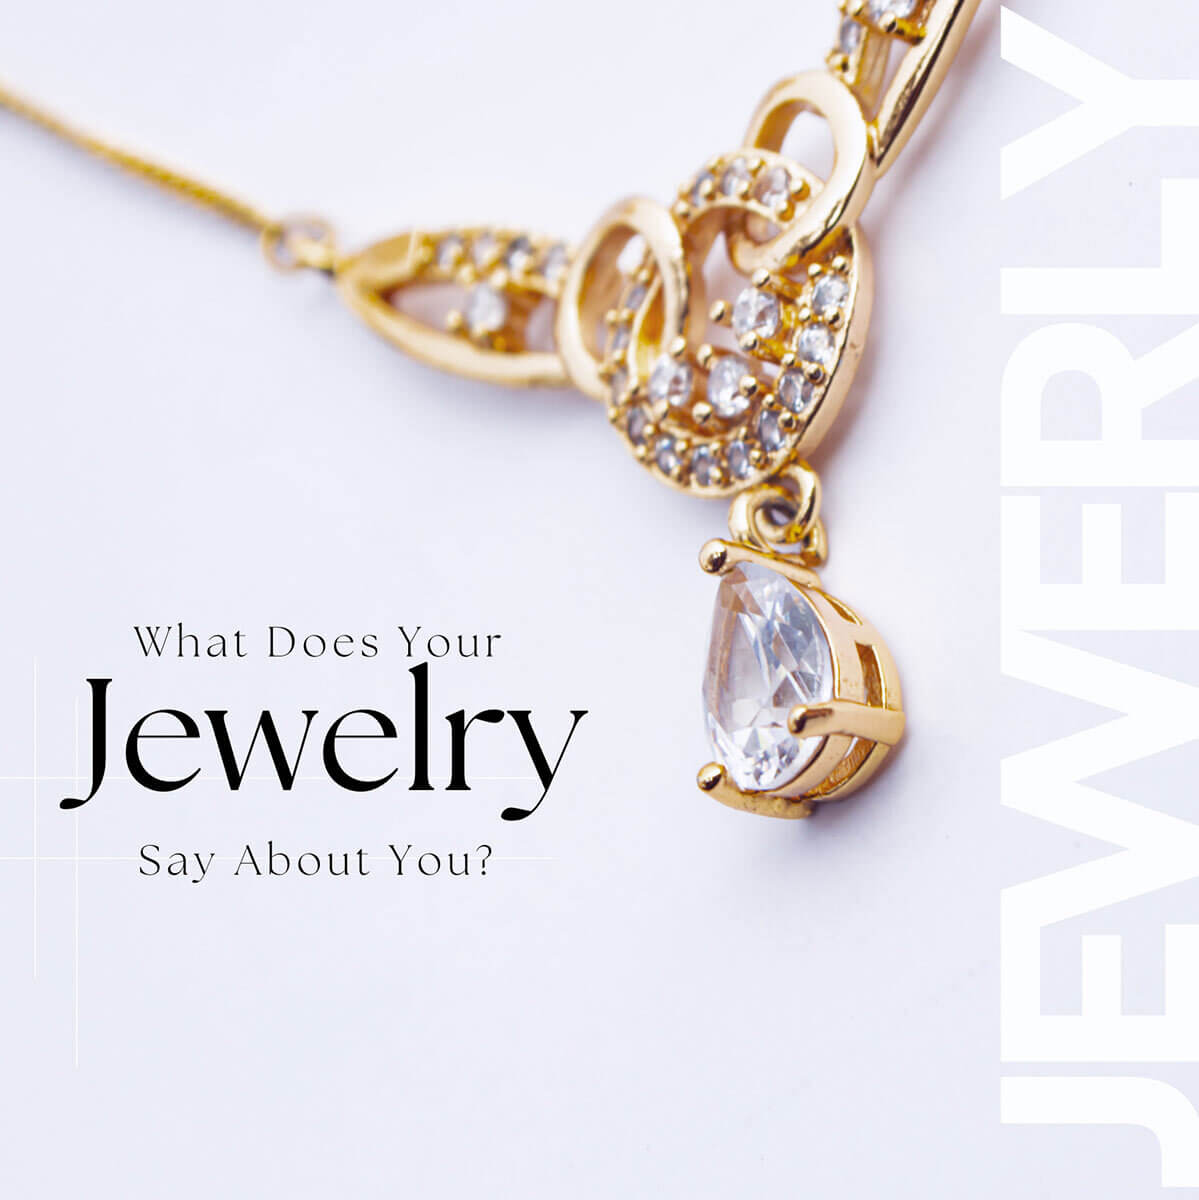 What Does Your Jewelry Say About You? Tips to Find Your Must-Own Women&#8217;s Designer Jewelry!